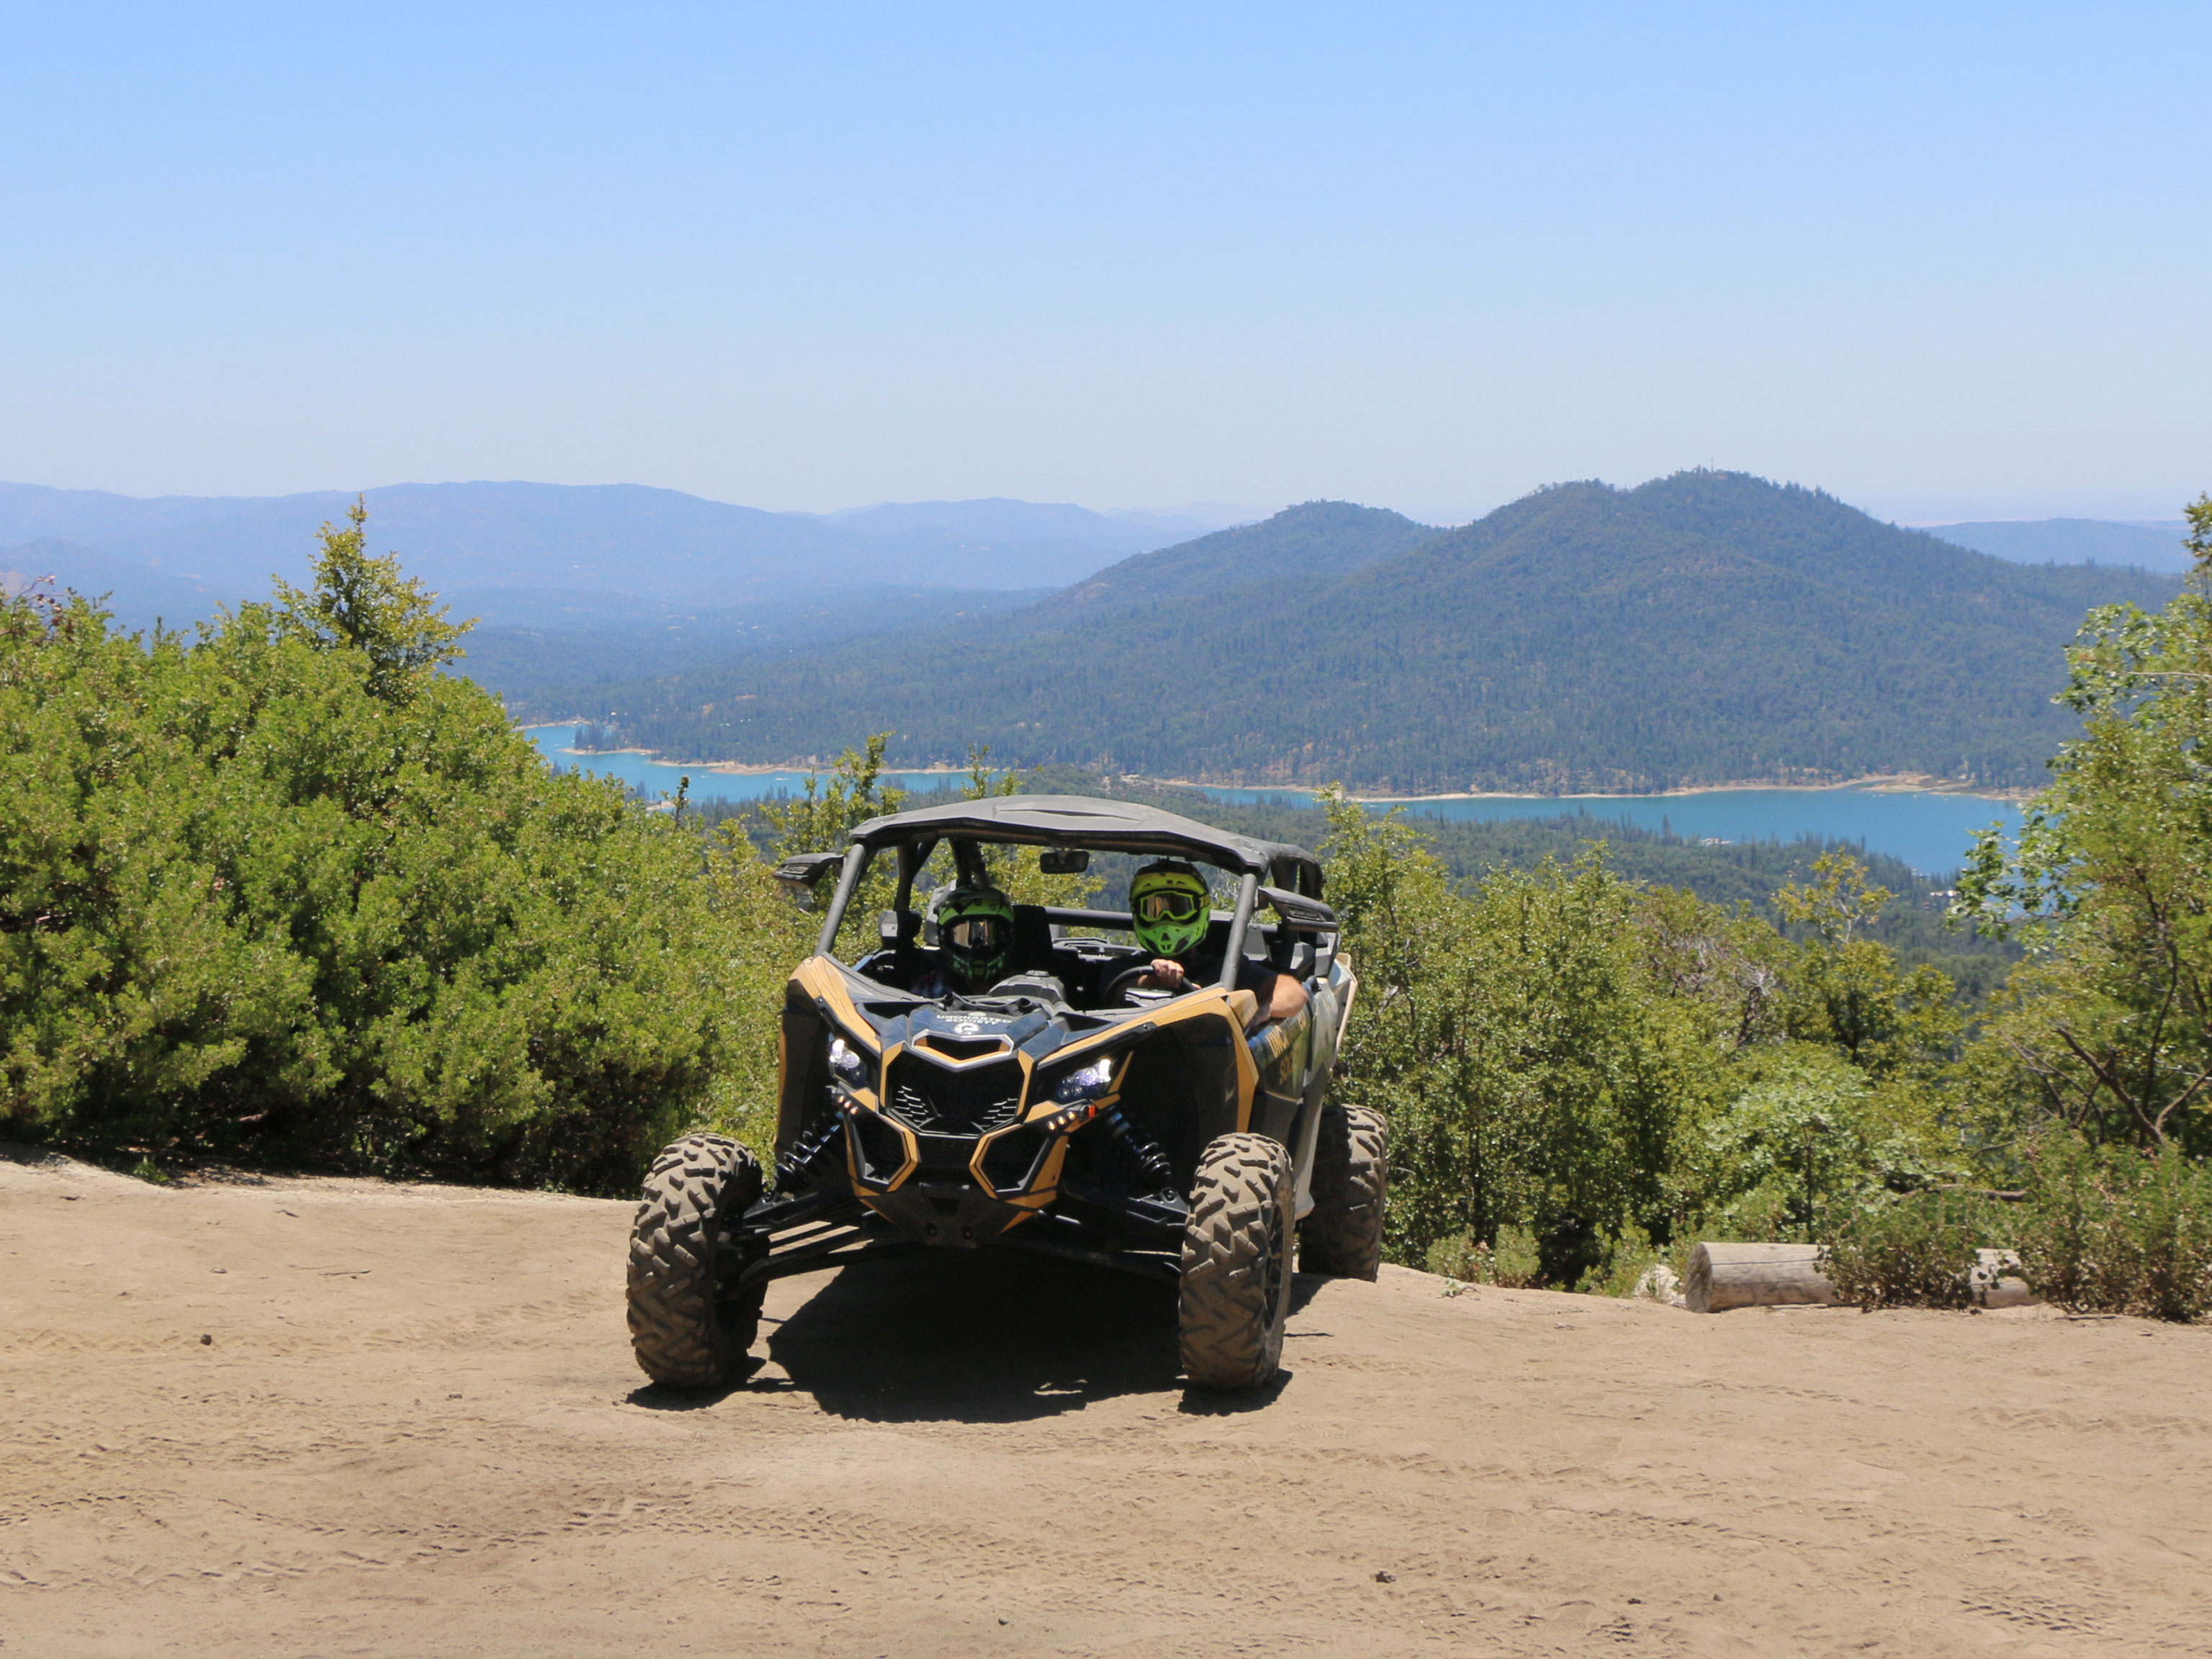 A Can-Am SxS in front of a mountain view